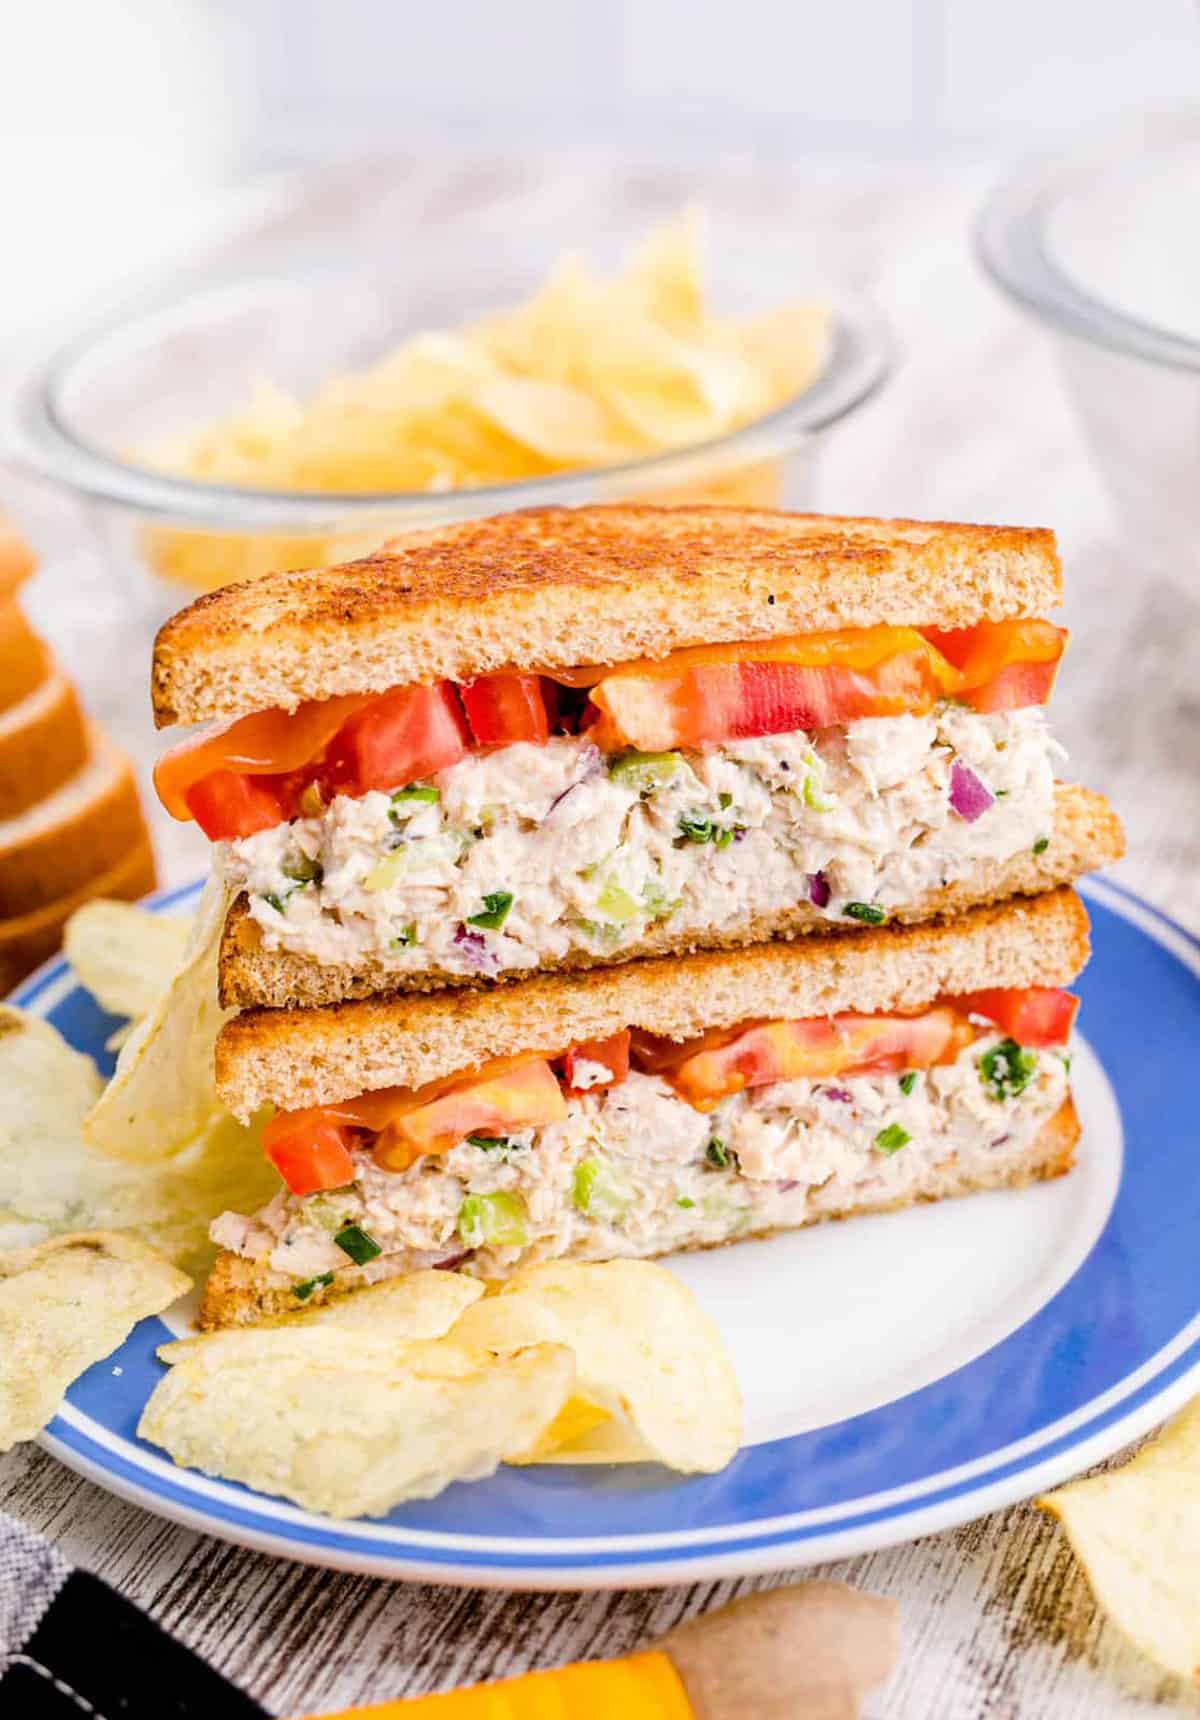 Tuna Melt Recipe cut in half on white and blue plate served with potato chips.